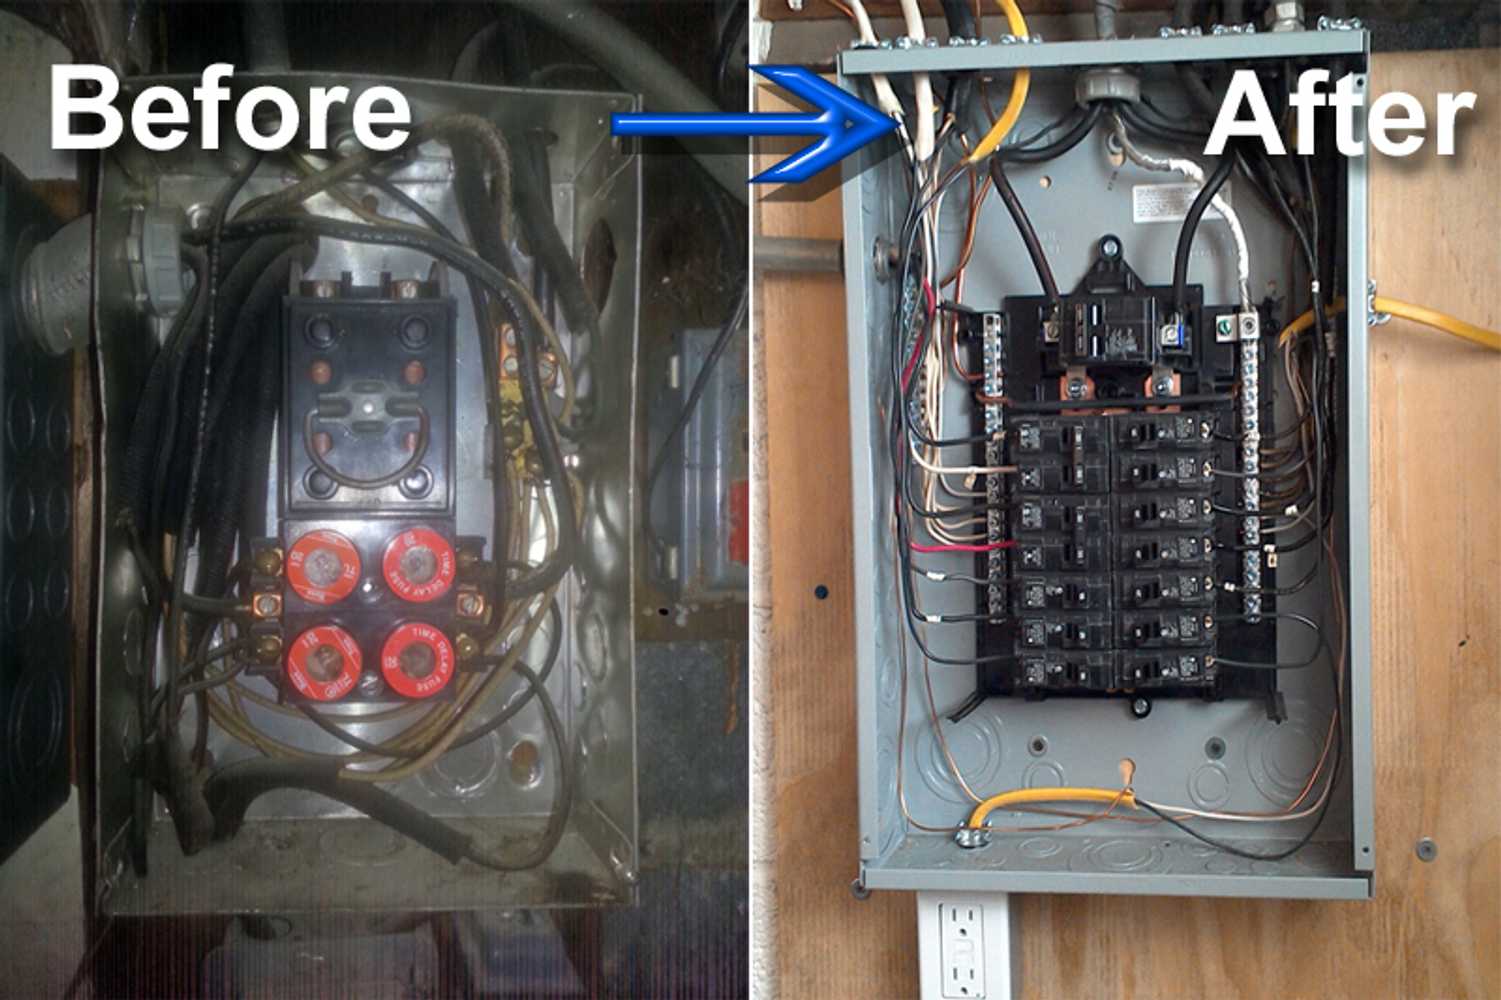 Upgrade outdated, dangerous panel box